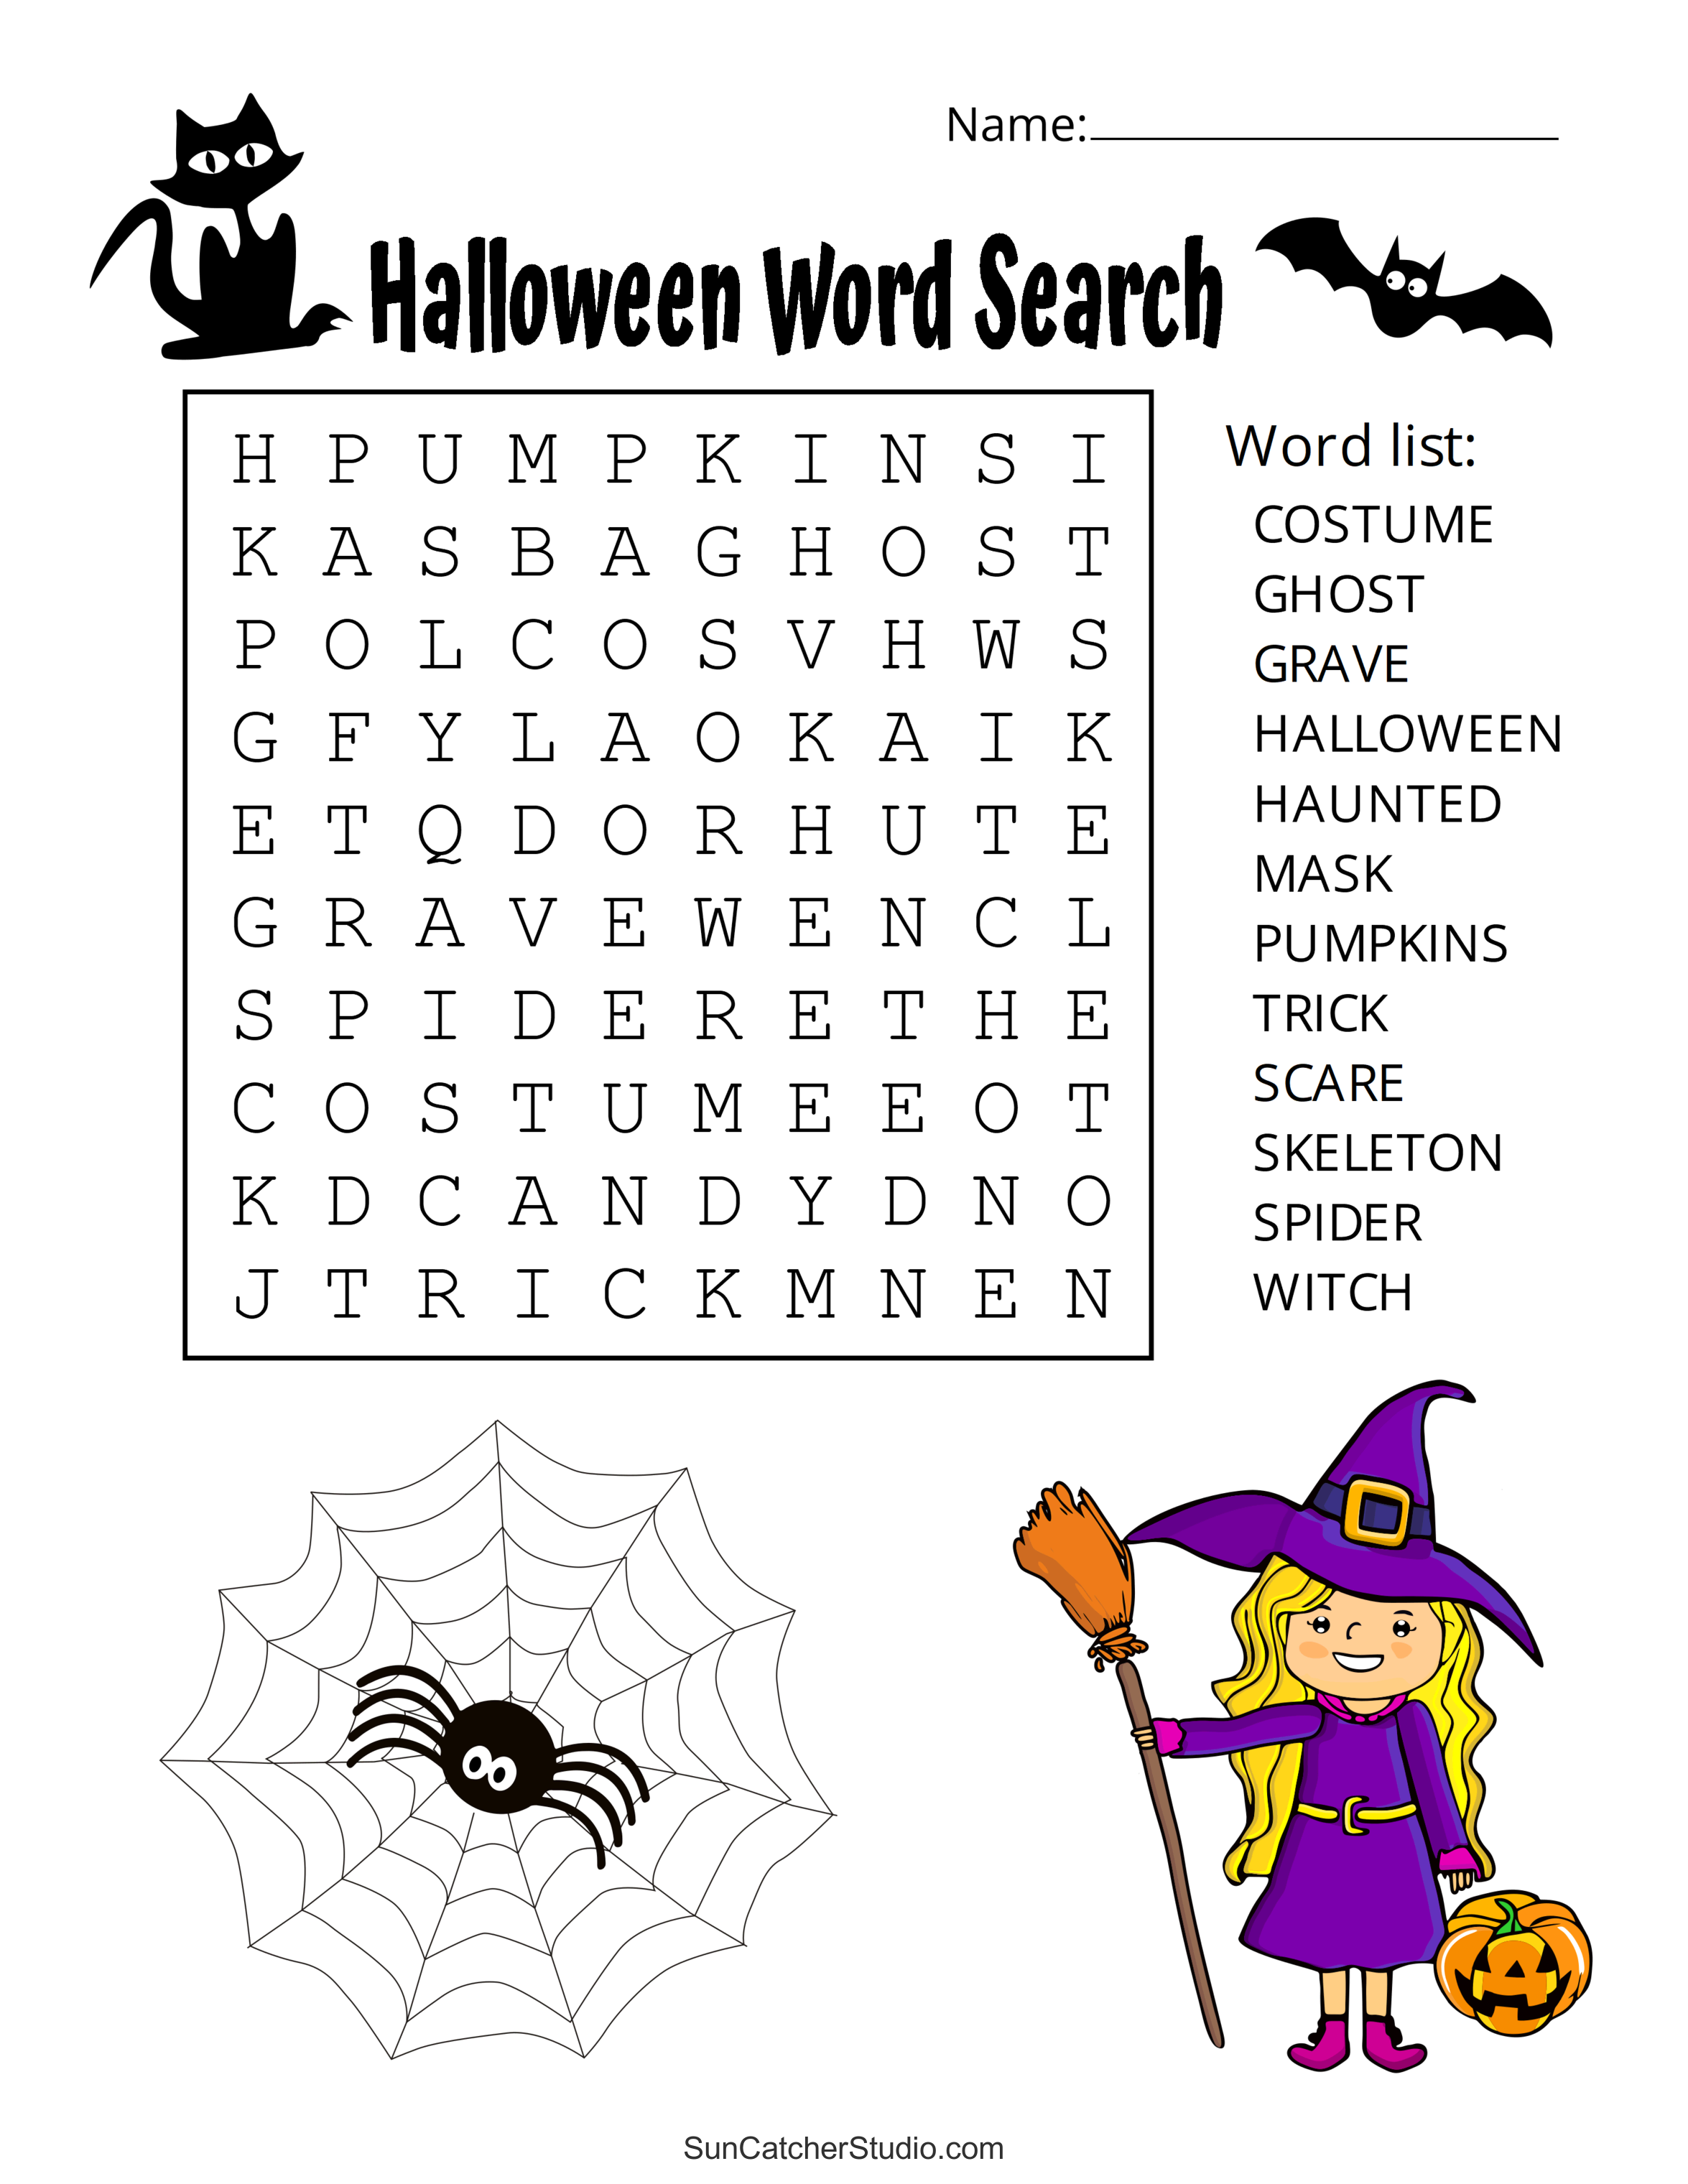 Halloween Word Search (Free Printable Puzzles) – Diy Projects for Free Printable Halloween Puzzles